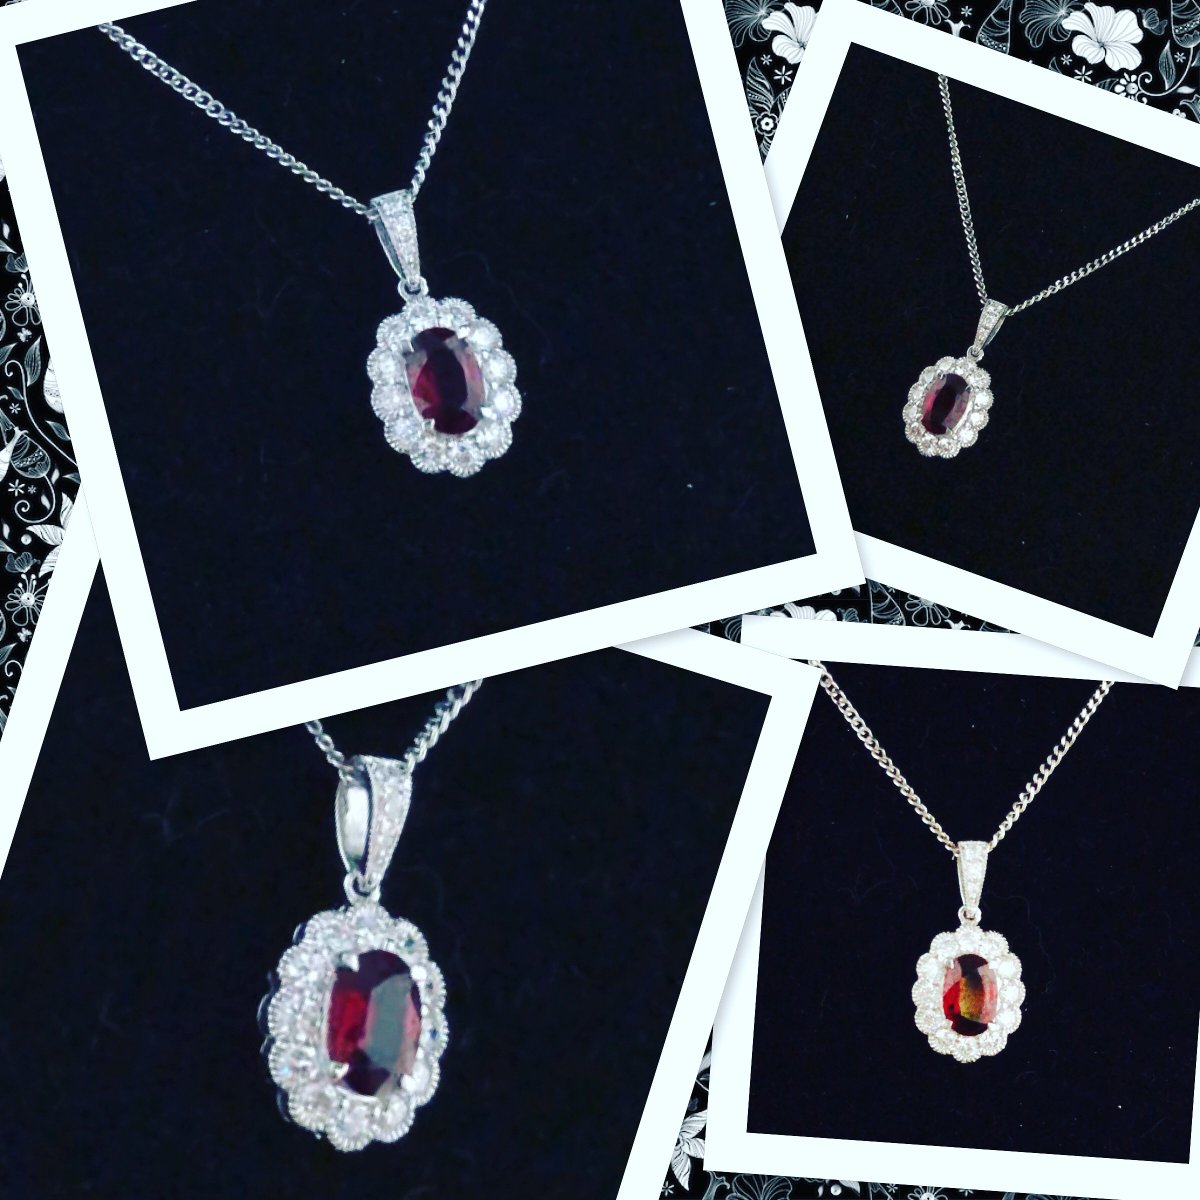 Today at Alexander’s Jewellers Skipton, we have a 18ct Ruby & Diamond necklace, elegantly designed & ready to be purchased @AlexandersJewls !
POA
.
.
.
.
#Necklace #RubyandDiamond #ElegantJewellery #JewelleryDesign #GoBeyondTheOrdinary #cravencourtshoppingcentre